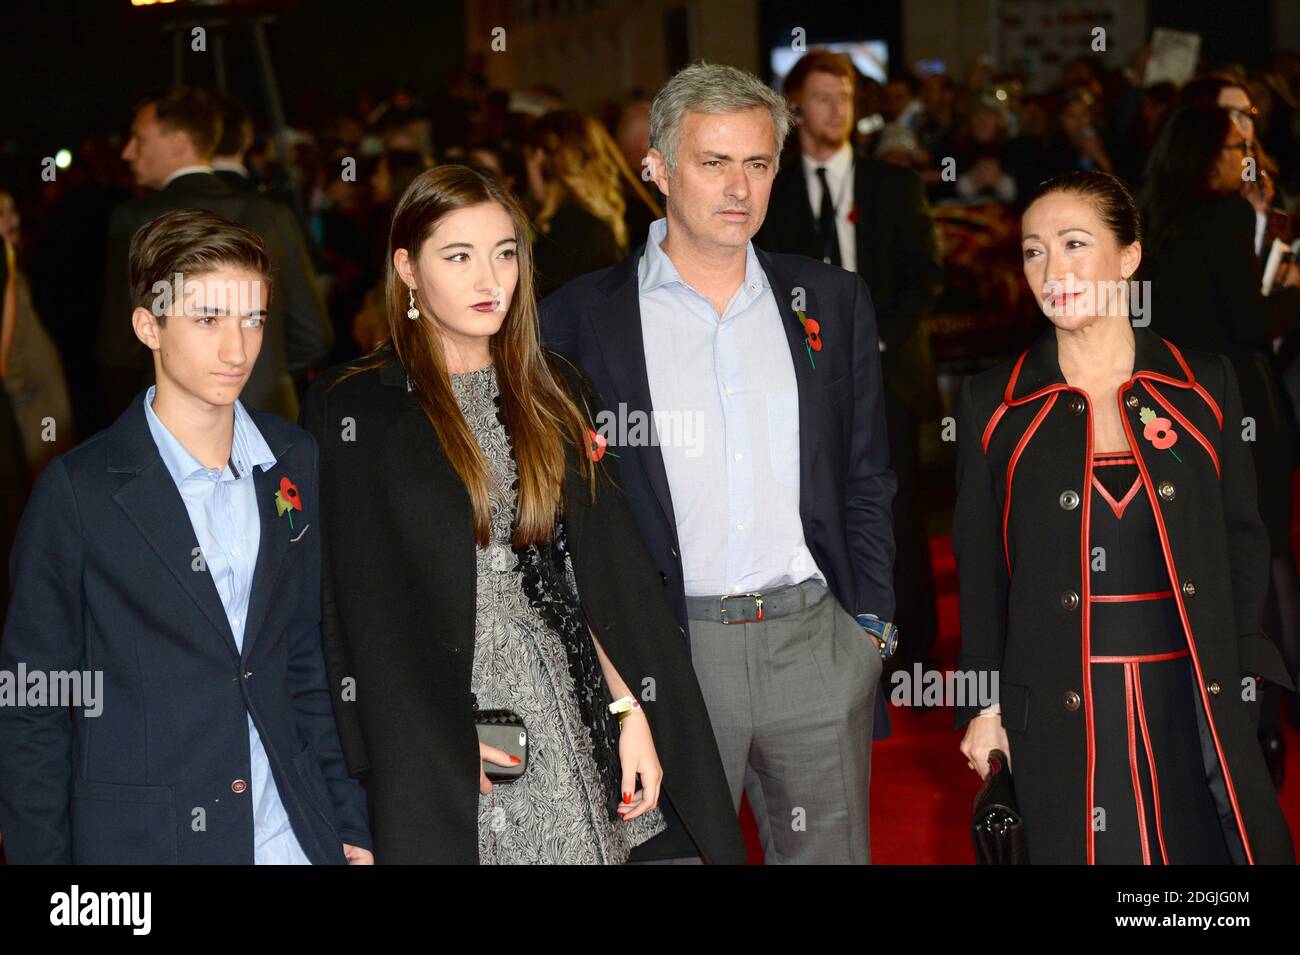 Jose Mourinho with wife Matilde Faria and children Matilde and Jose Mario, Jr. arriving at The Hunger Games: Mockingjay Part 1 World Premiere held at Odeon Leicester Square, London Stock Photo